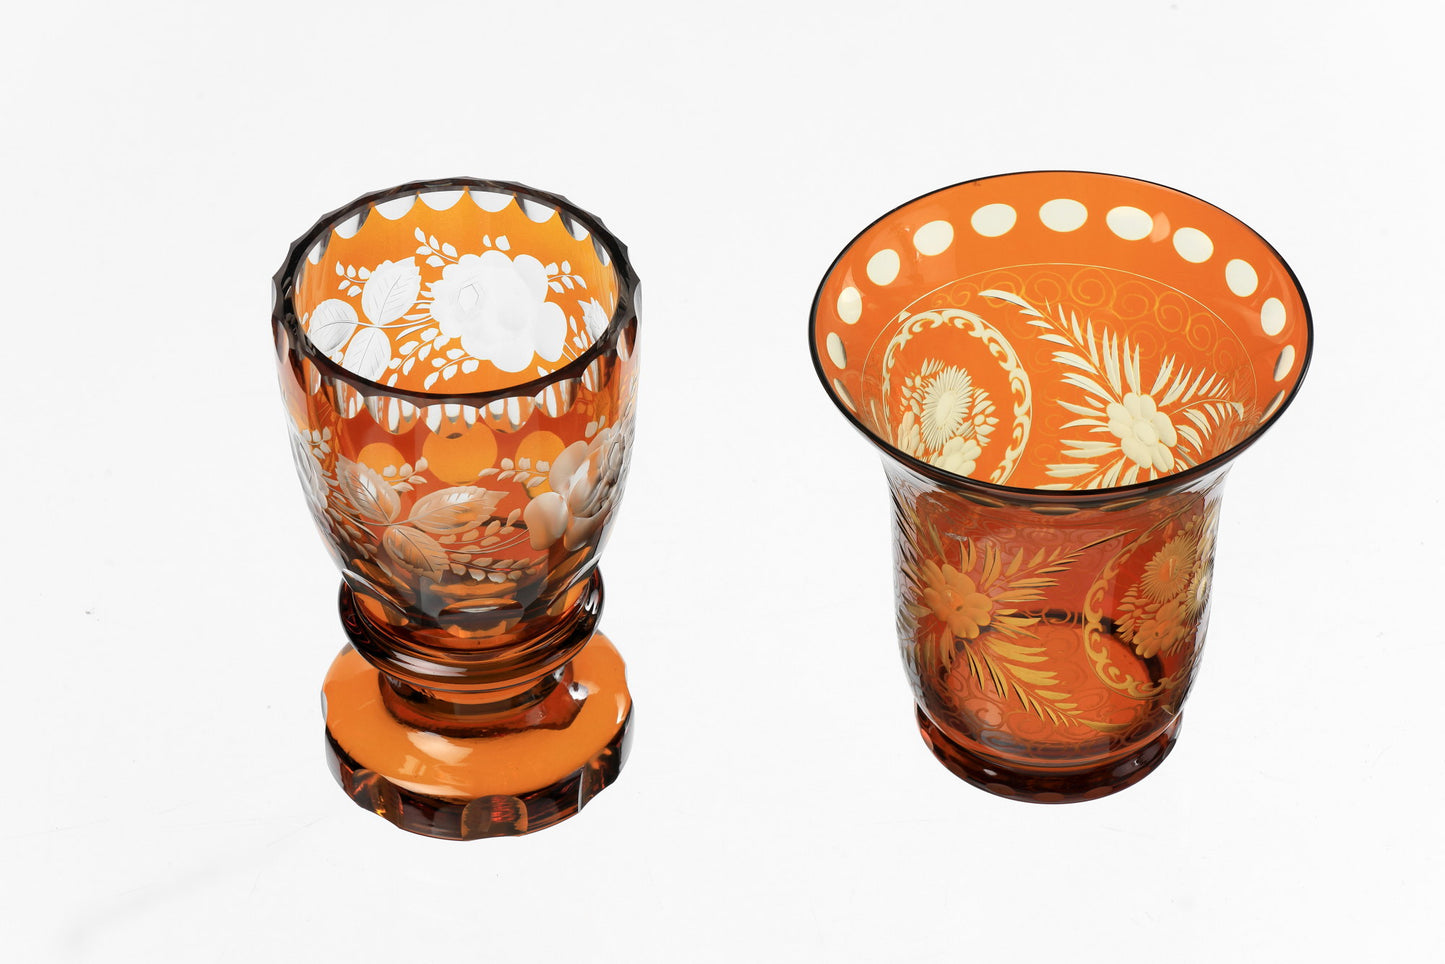 Rust-colored Bohemian crystal goblet